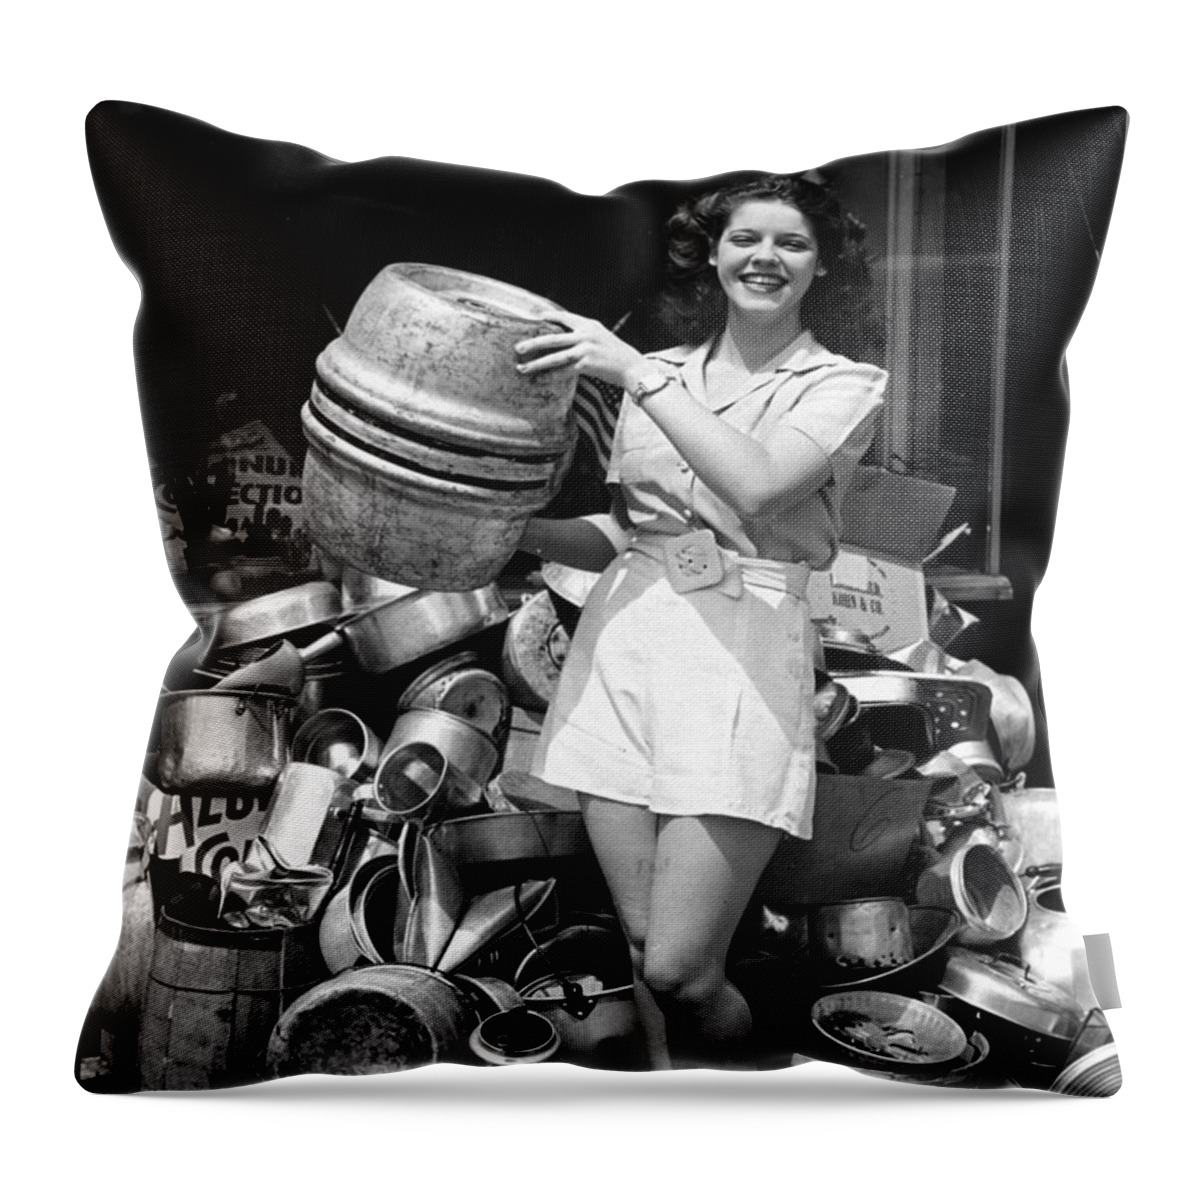 Prohibition. 20s Throw Pillow featuring the painting Funny Roaring Twenties No Prohibition Roaring 20s Gift Prohibition Keg by Tony Rubino